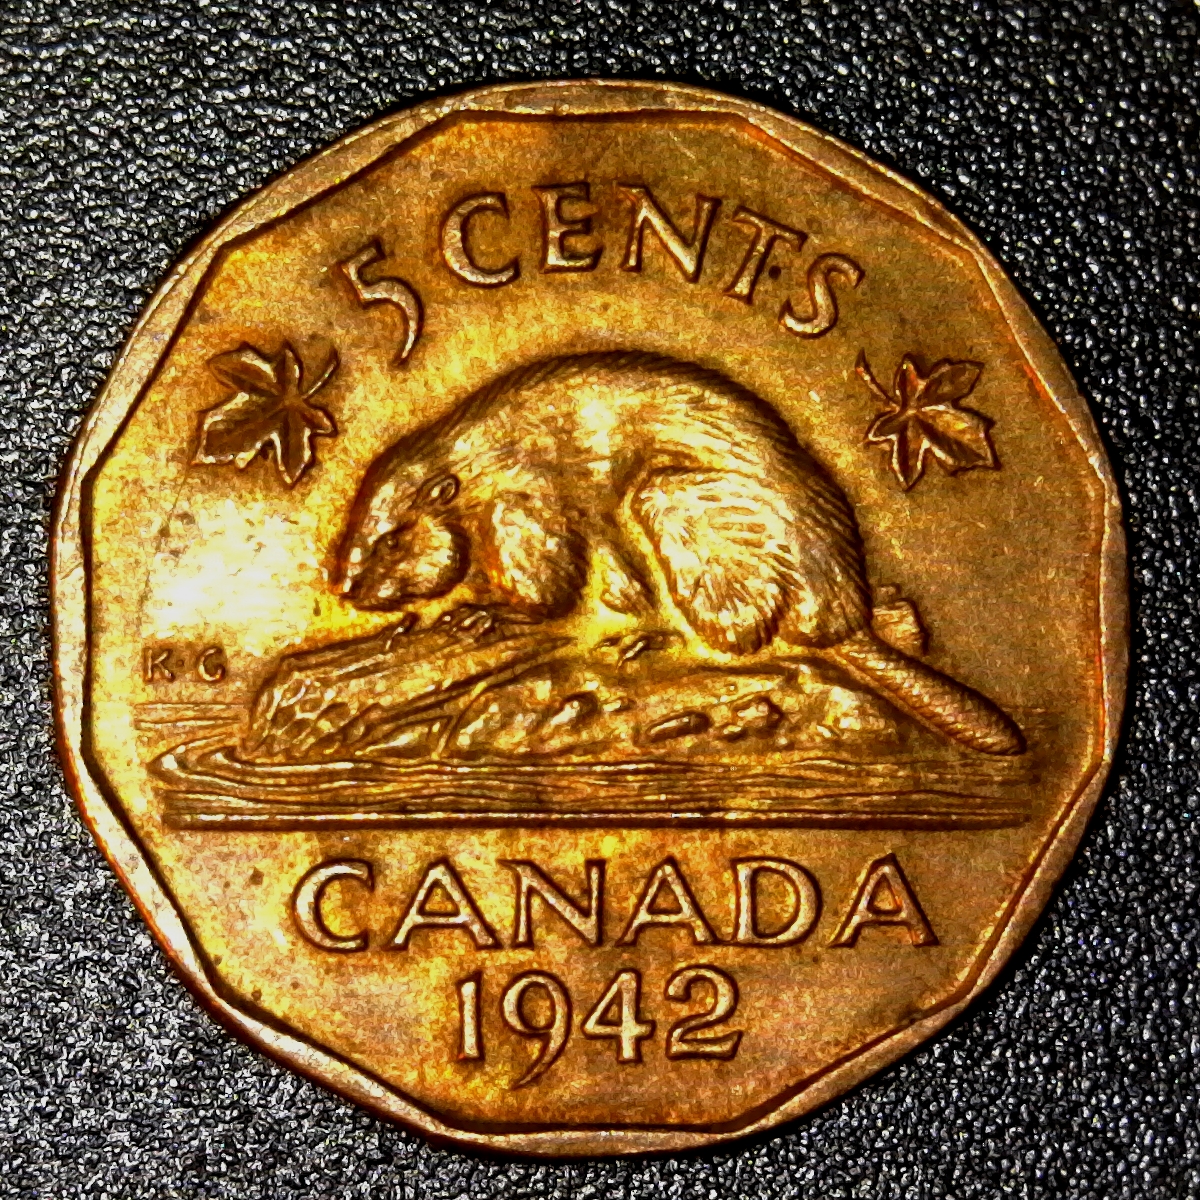 Canada 5 Cents 1942 obverse less 10.jpg